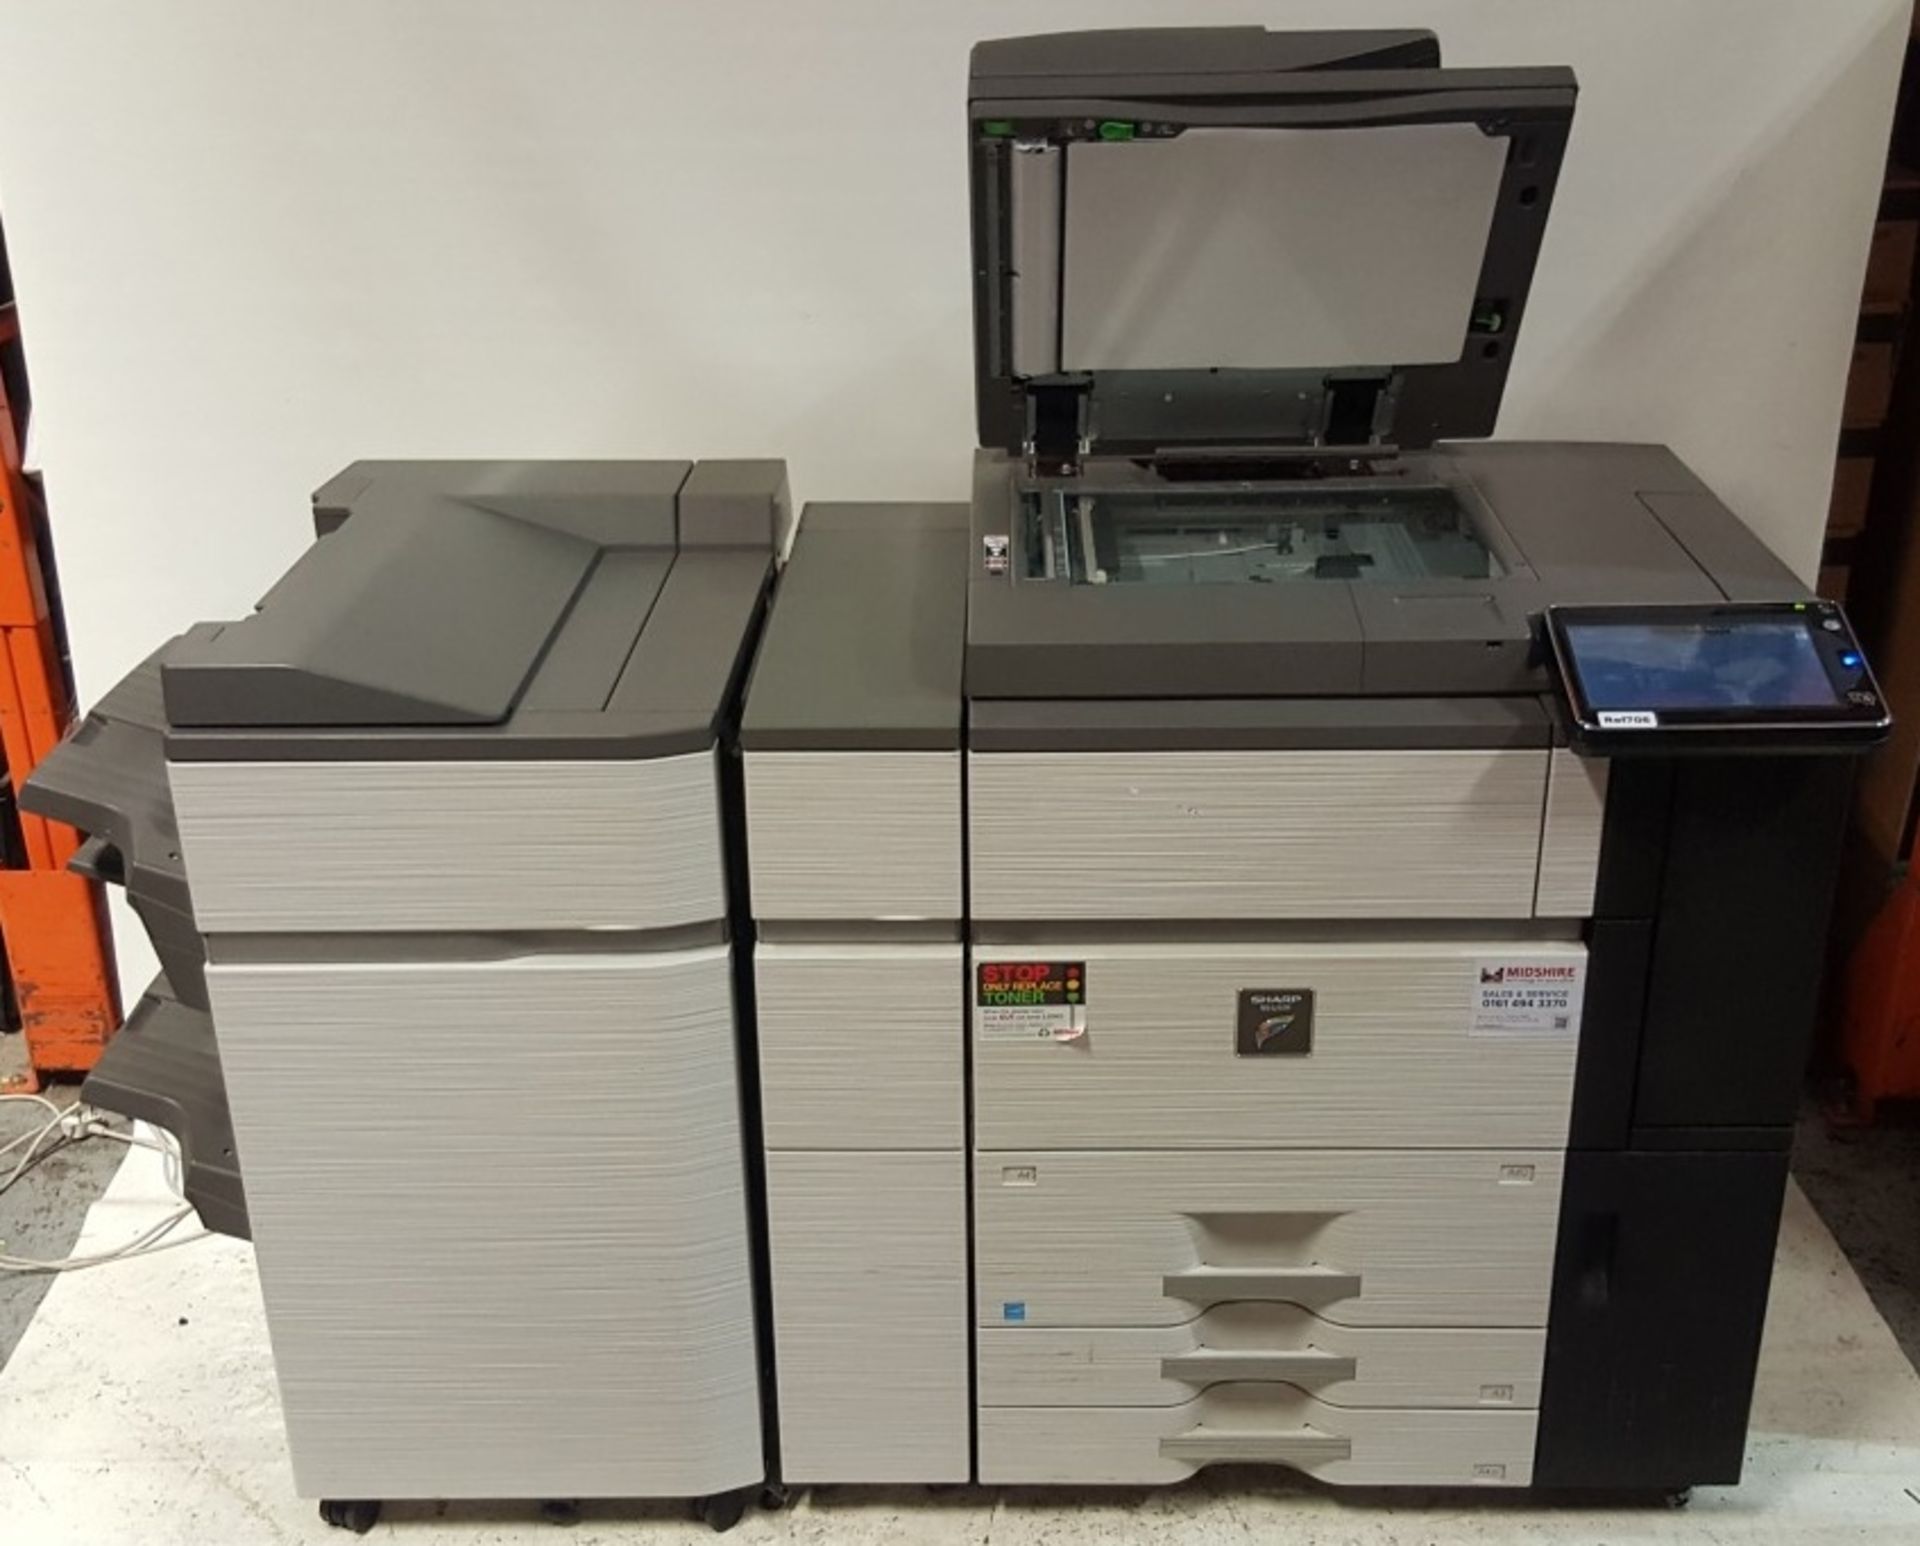 1 x Sharp MX6240N Office Printer + Saddle Stitch Finisher & Curl Correction Unit - CL452 -REF:Ref706 - Image 7 of 9